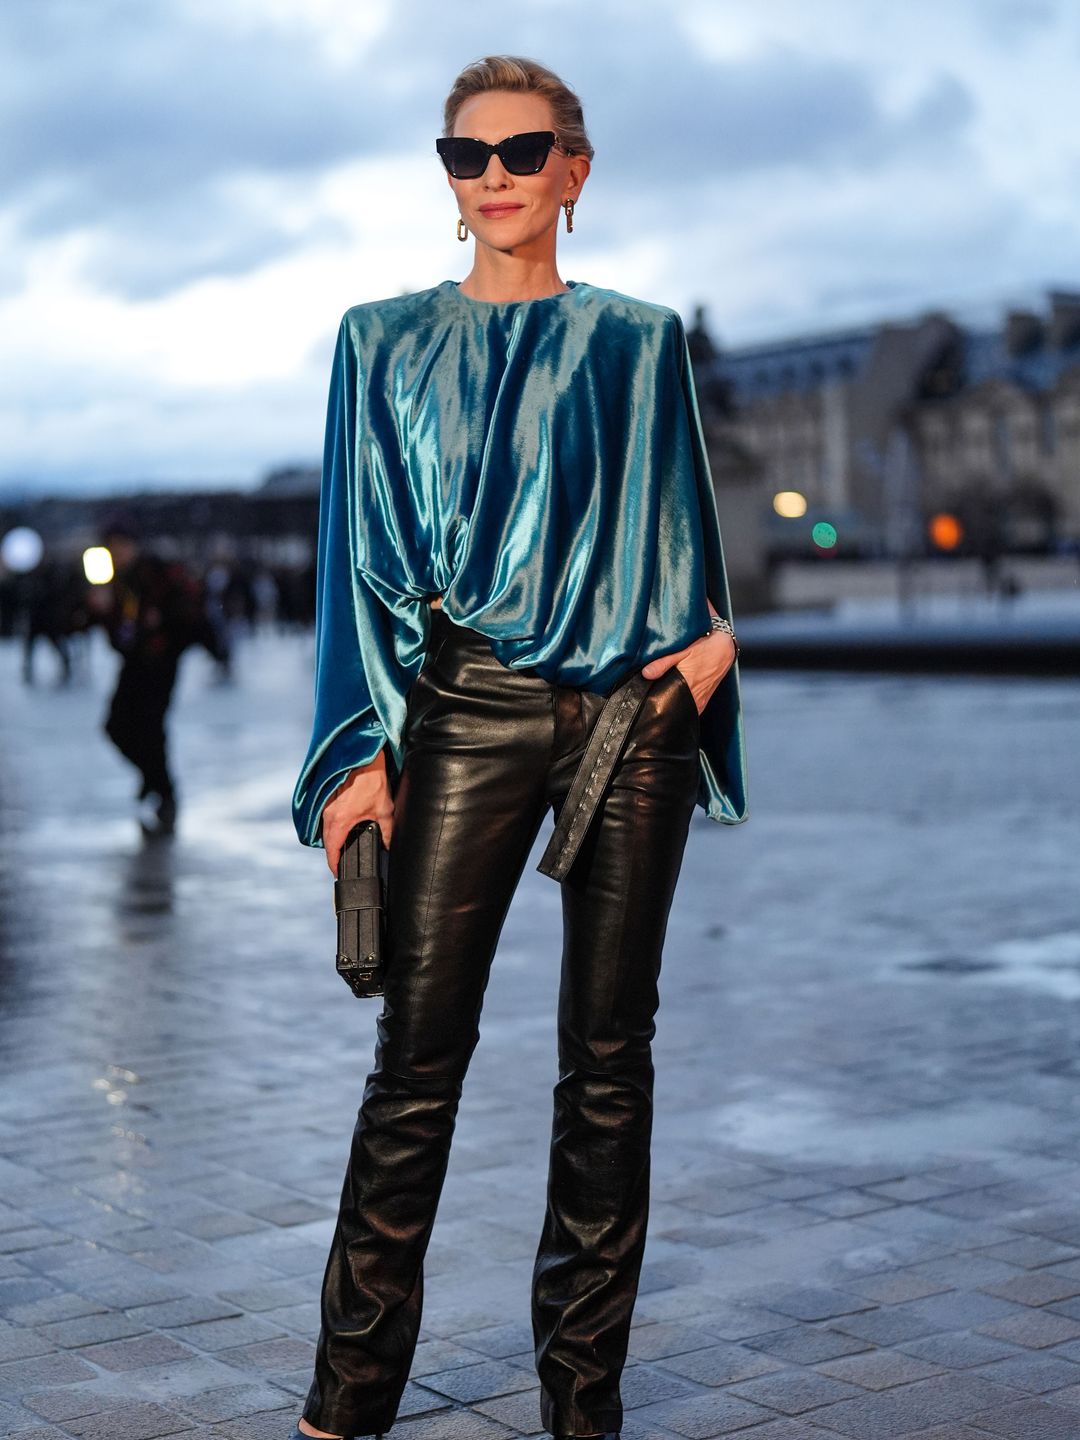 Cate Blanchett wears sunglasses, earrings, a blue turquoise gathered sleeveless lustrous shiny silk top, a bracelet, black leather flared pants and pointed shoes outside the Louis Vuitton show